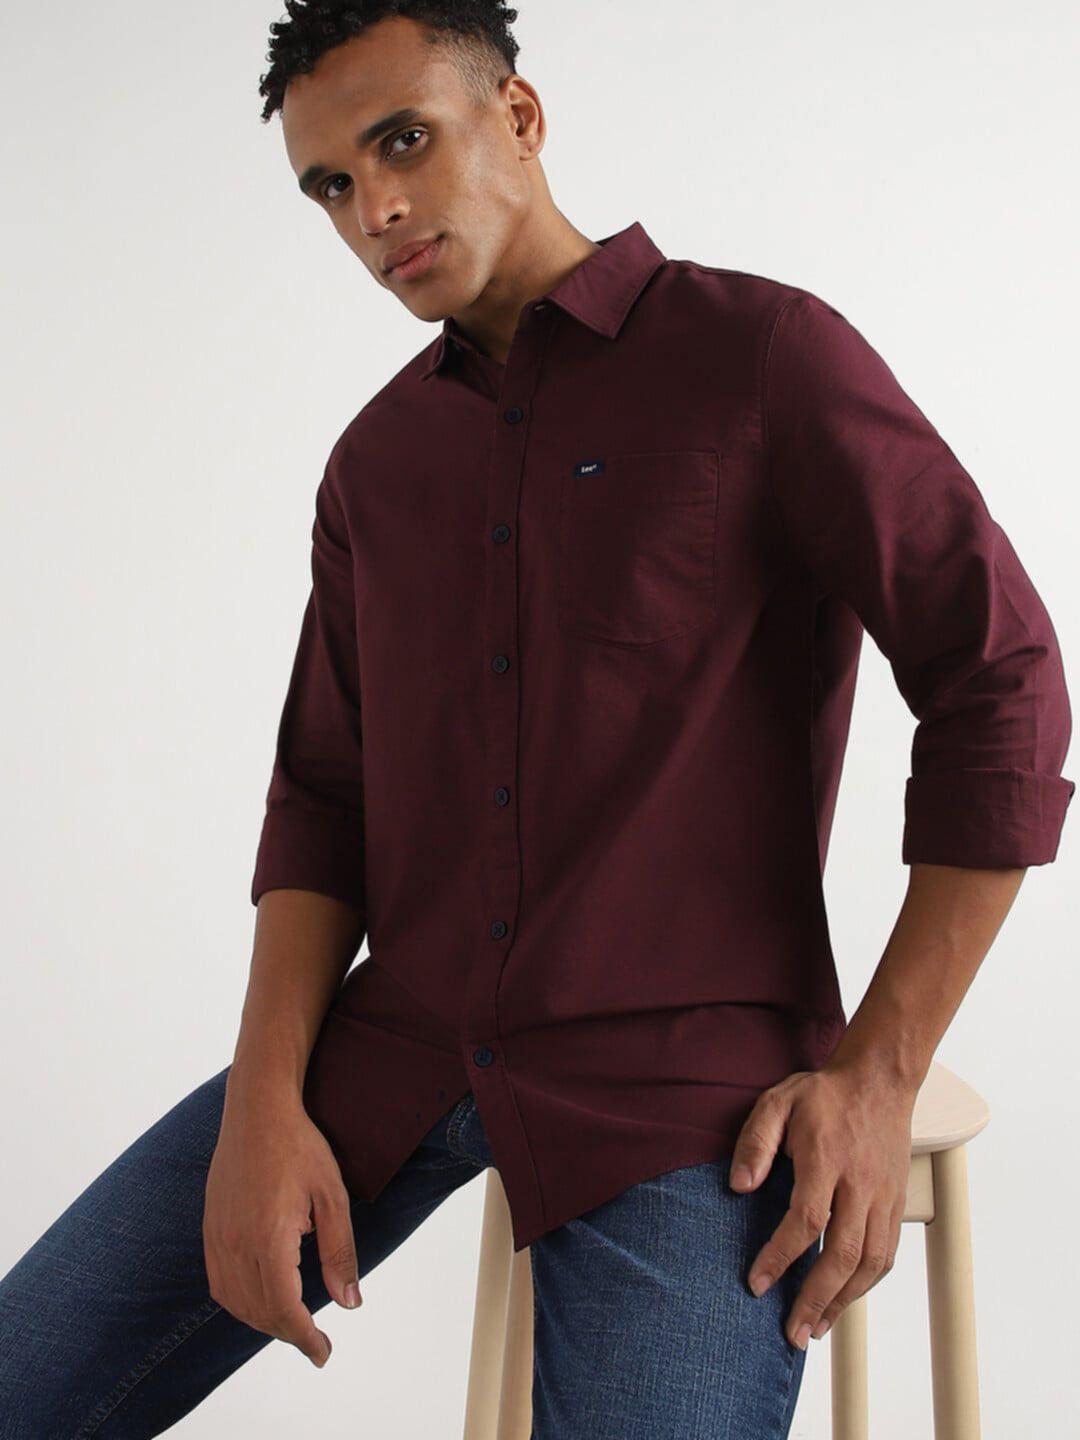 lee-slim-fit-spread-collar-long-sleeves-opaque-casual-organic-cotton-shirt